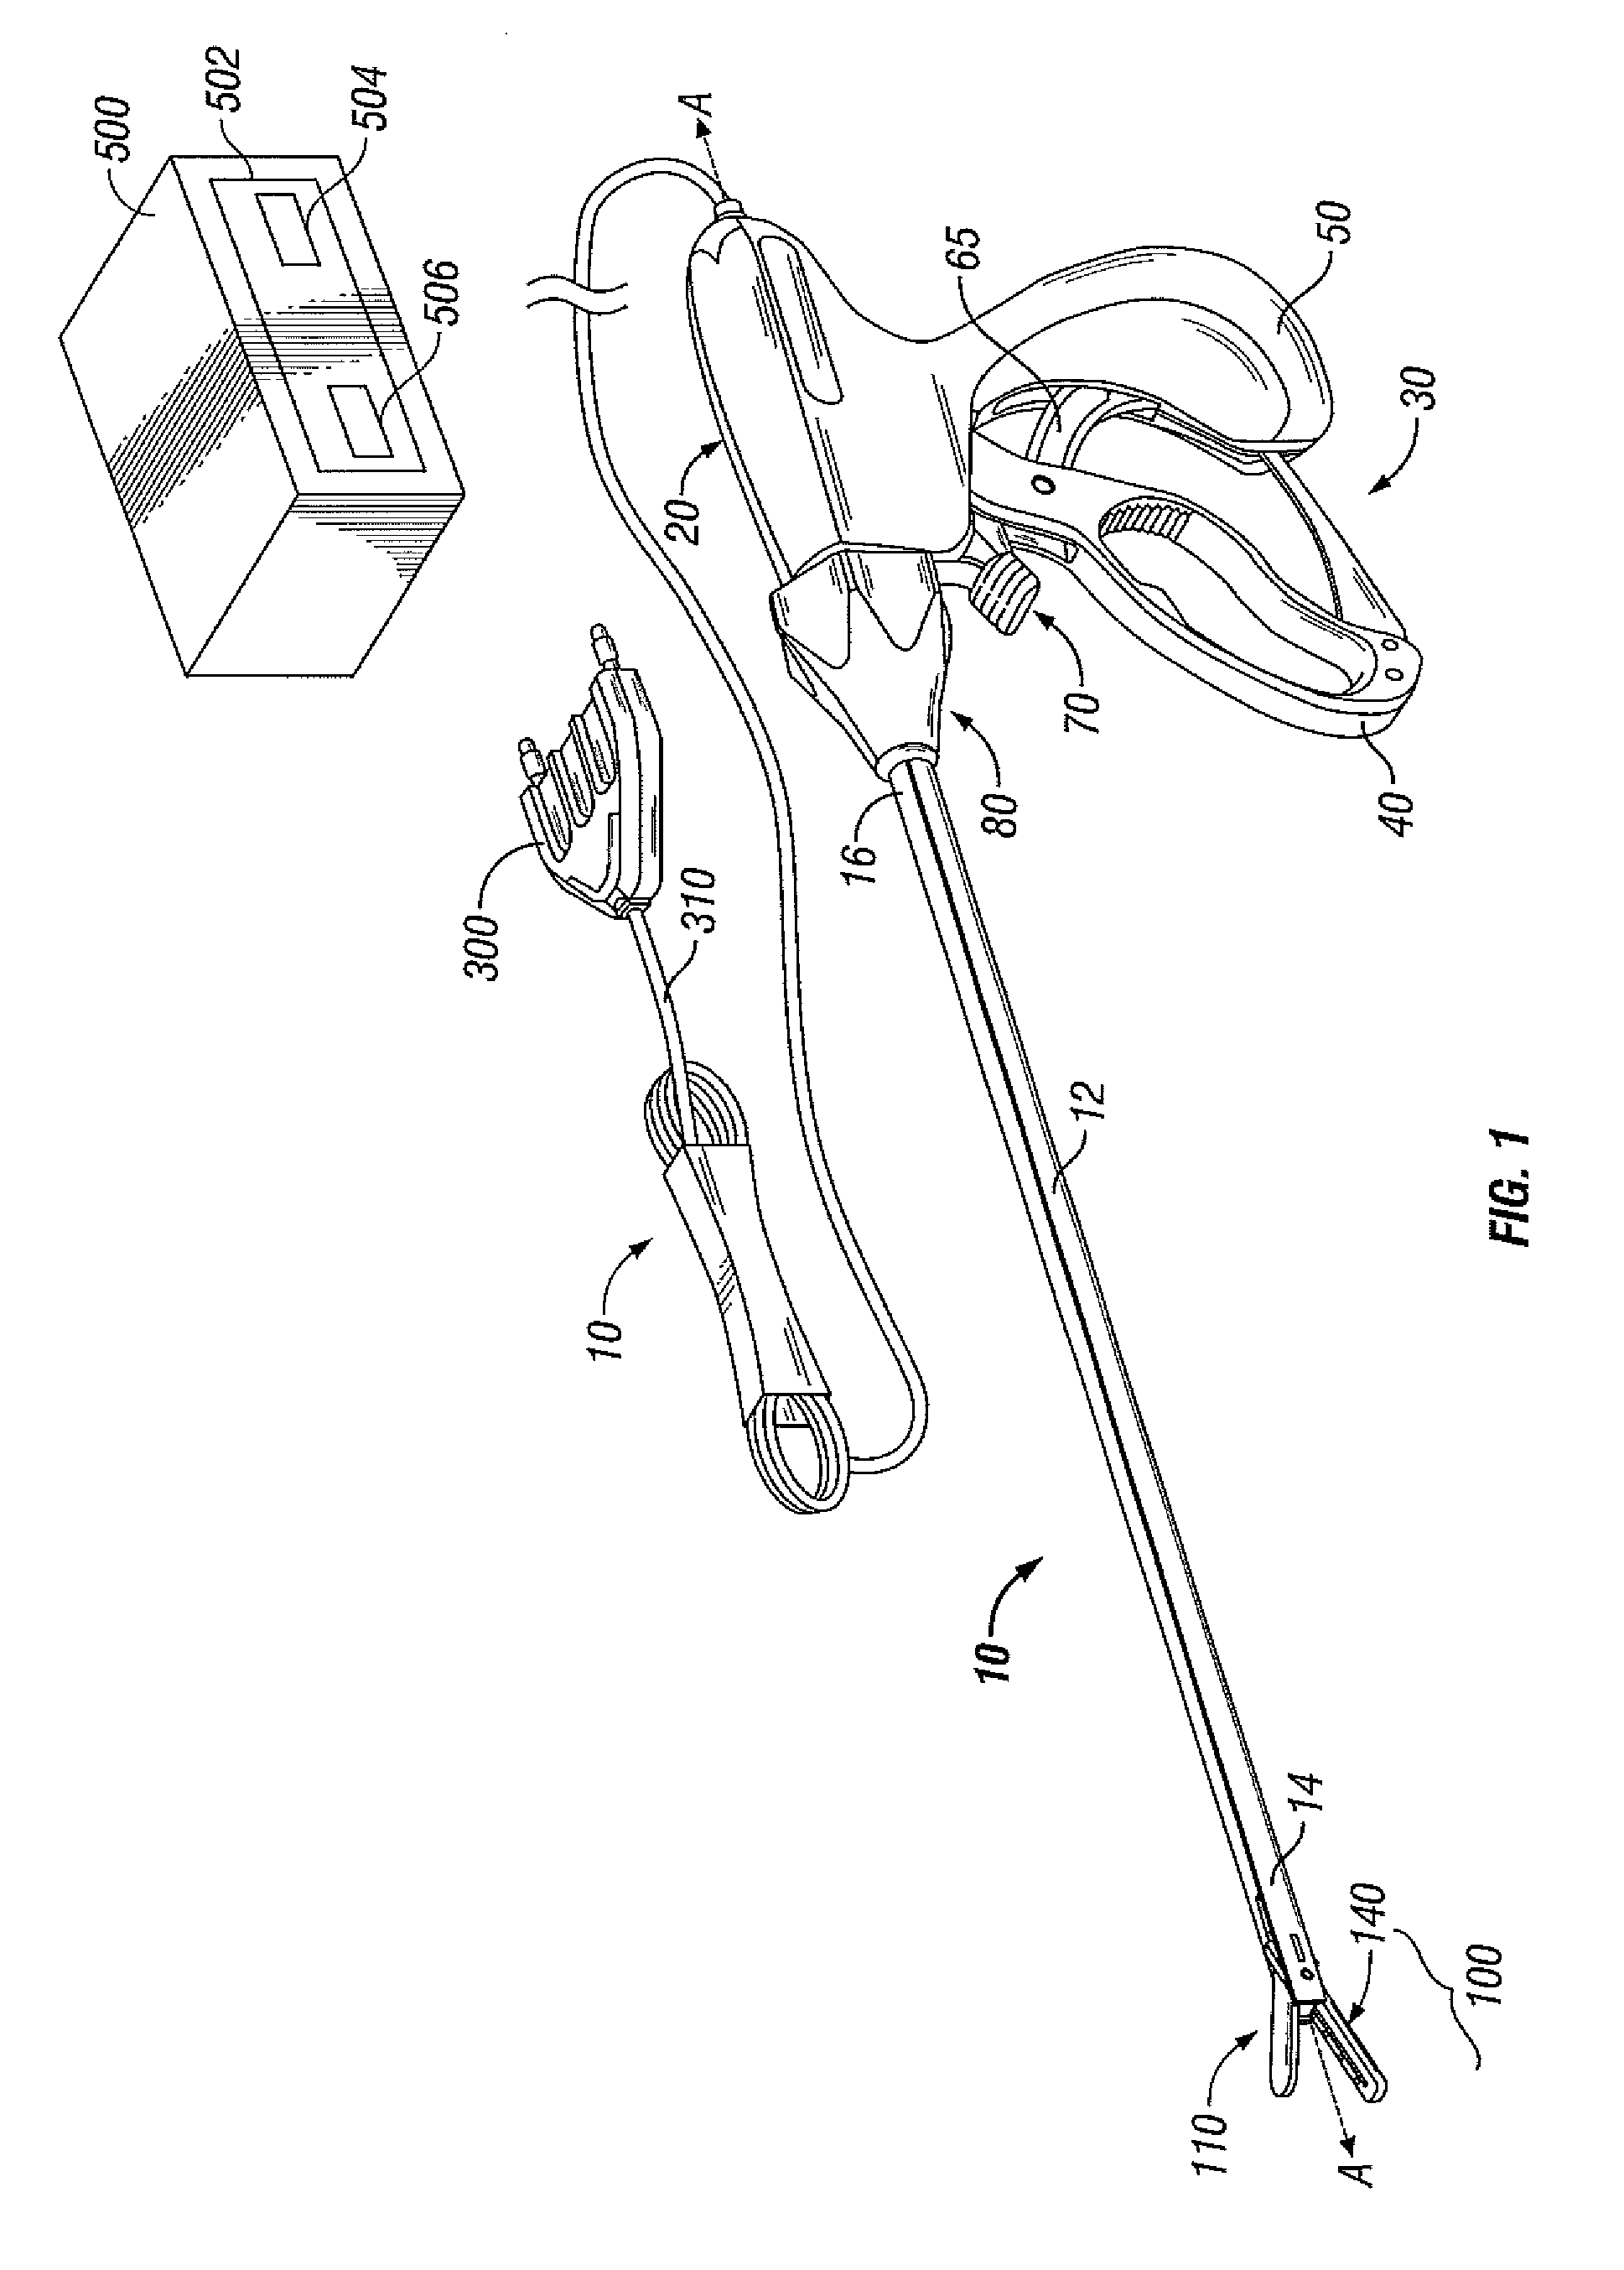 End Effector Assembly for Electrosurgical Devices and System for Using the Same